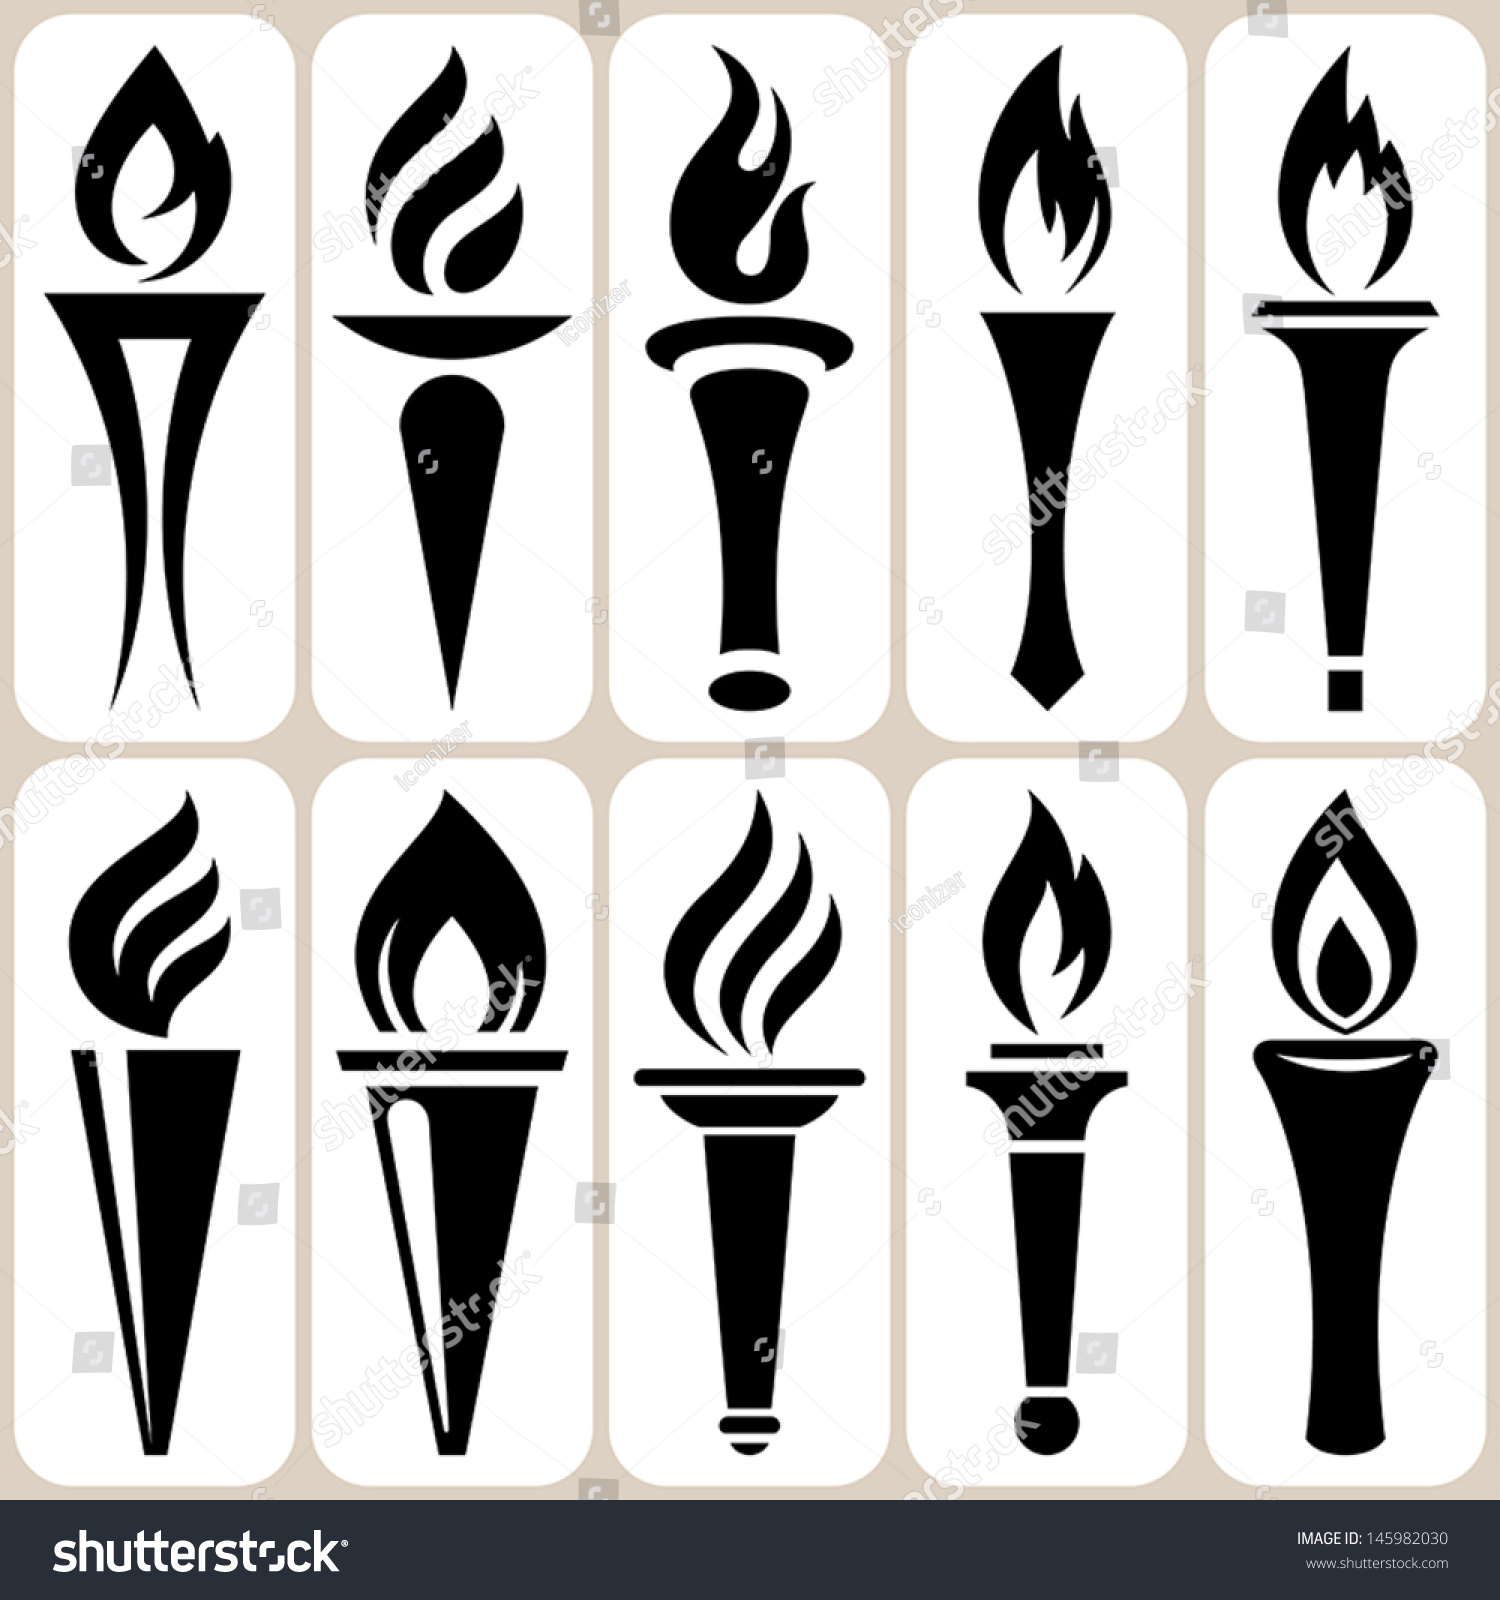 torch icons set #145982030